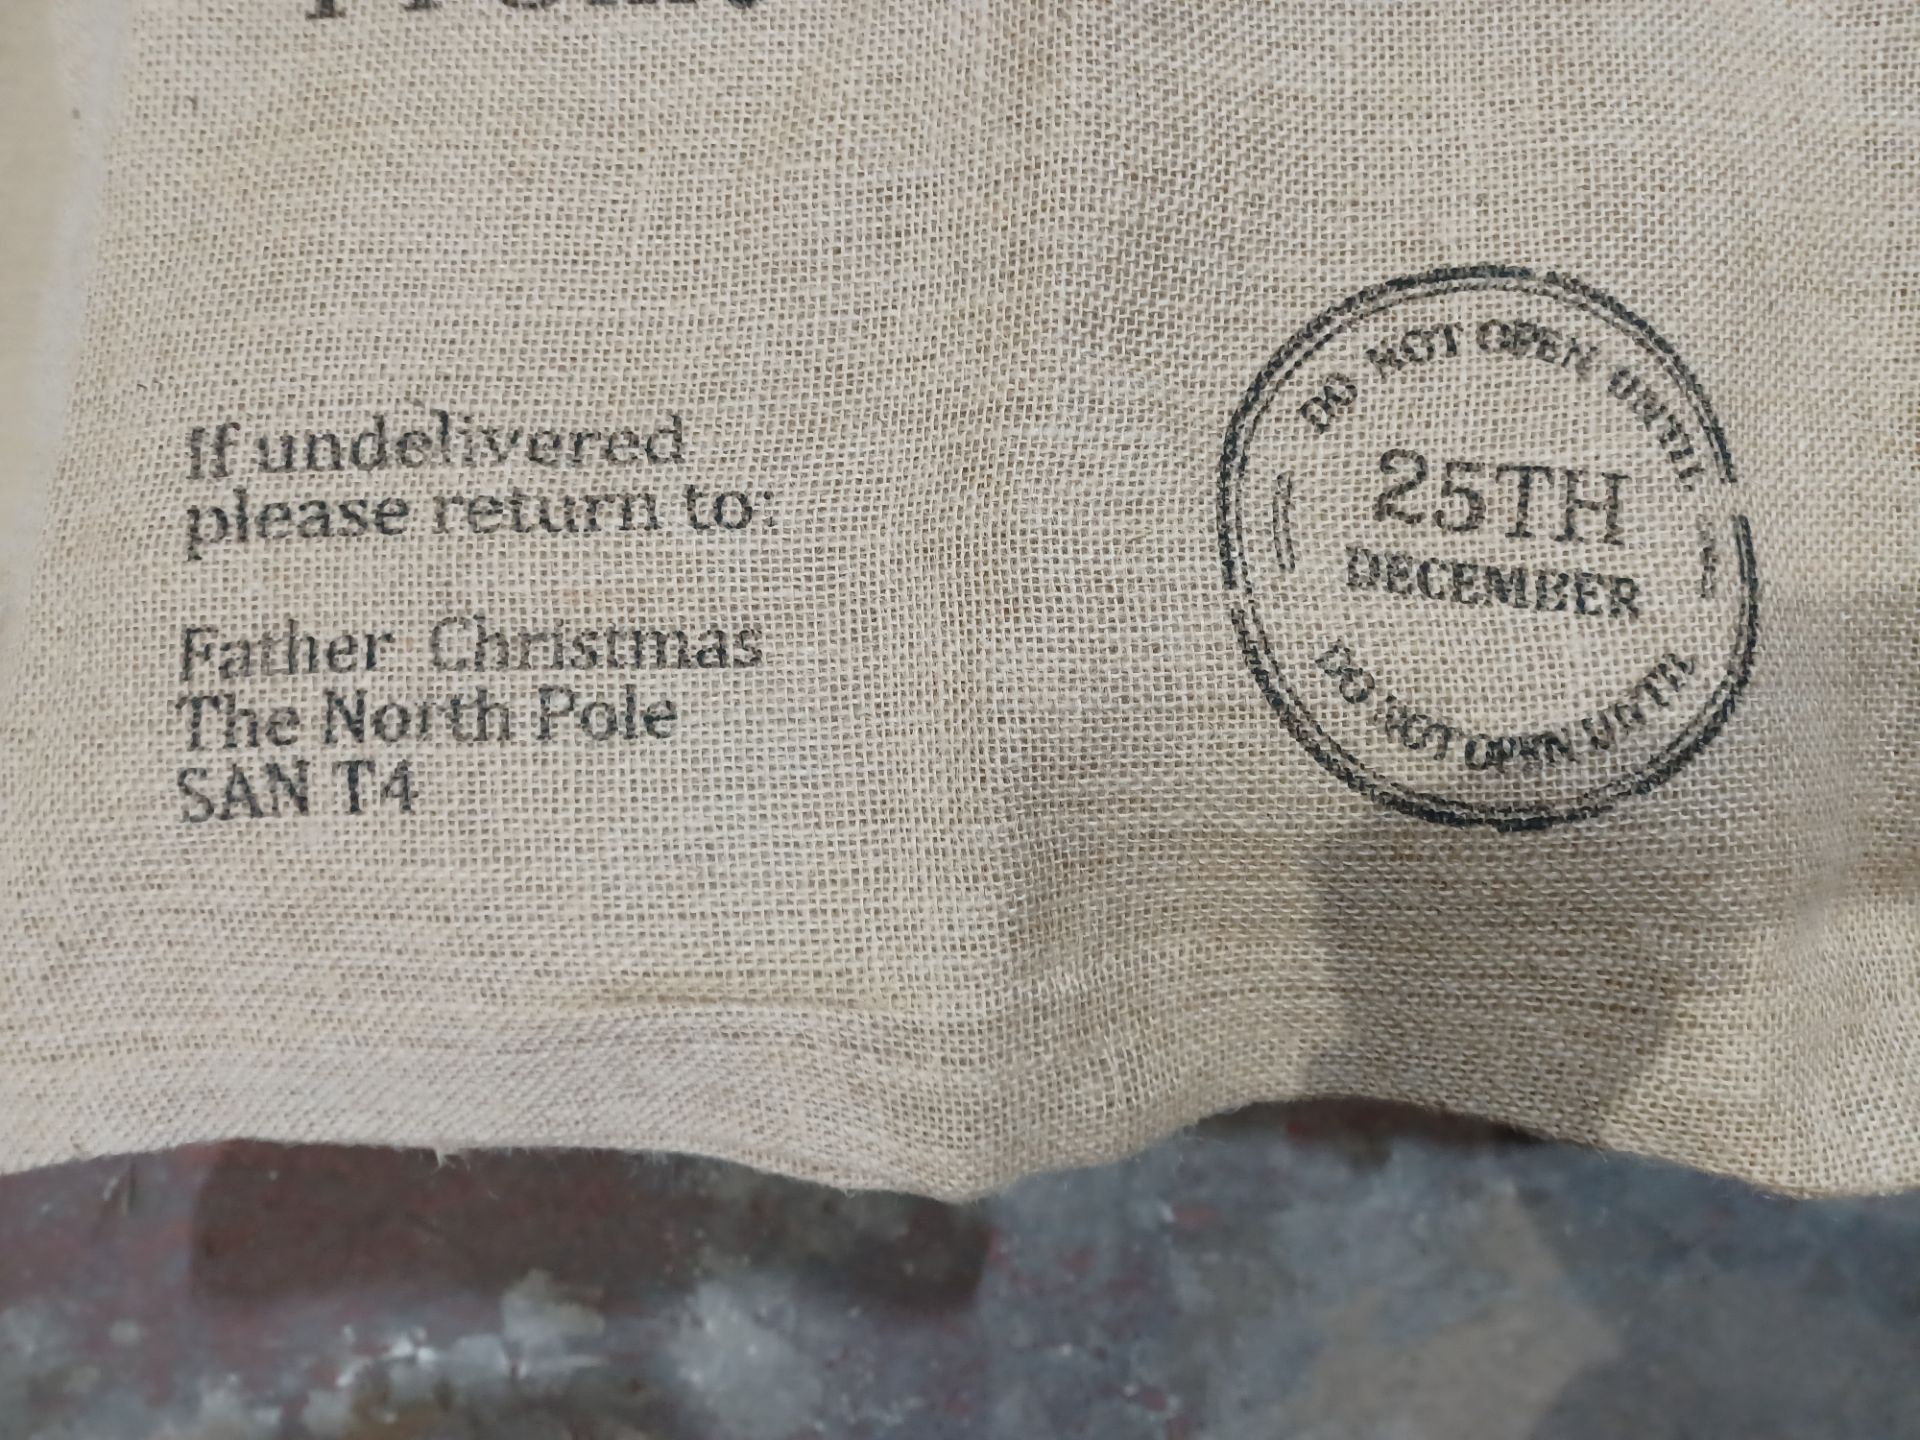 40 X NEW EXTRA LARGE CHRISTMAS HESSIAN SACKS. RRP £9.99 EACH. HIGH QUALITY. IDEAL FOR STOCKING - Image 3 of 4